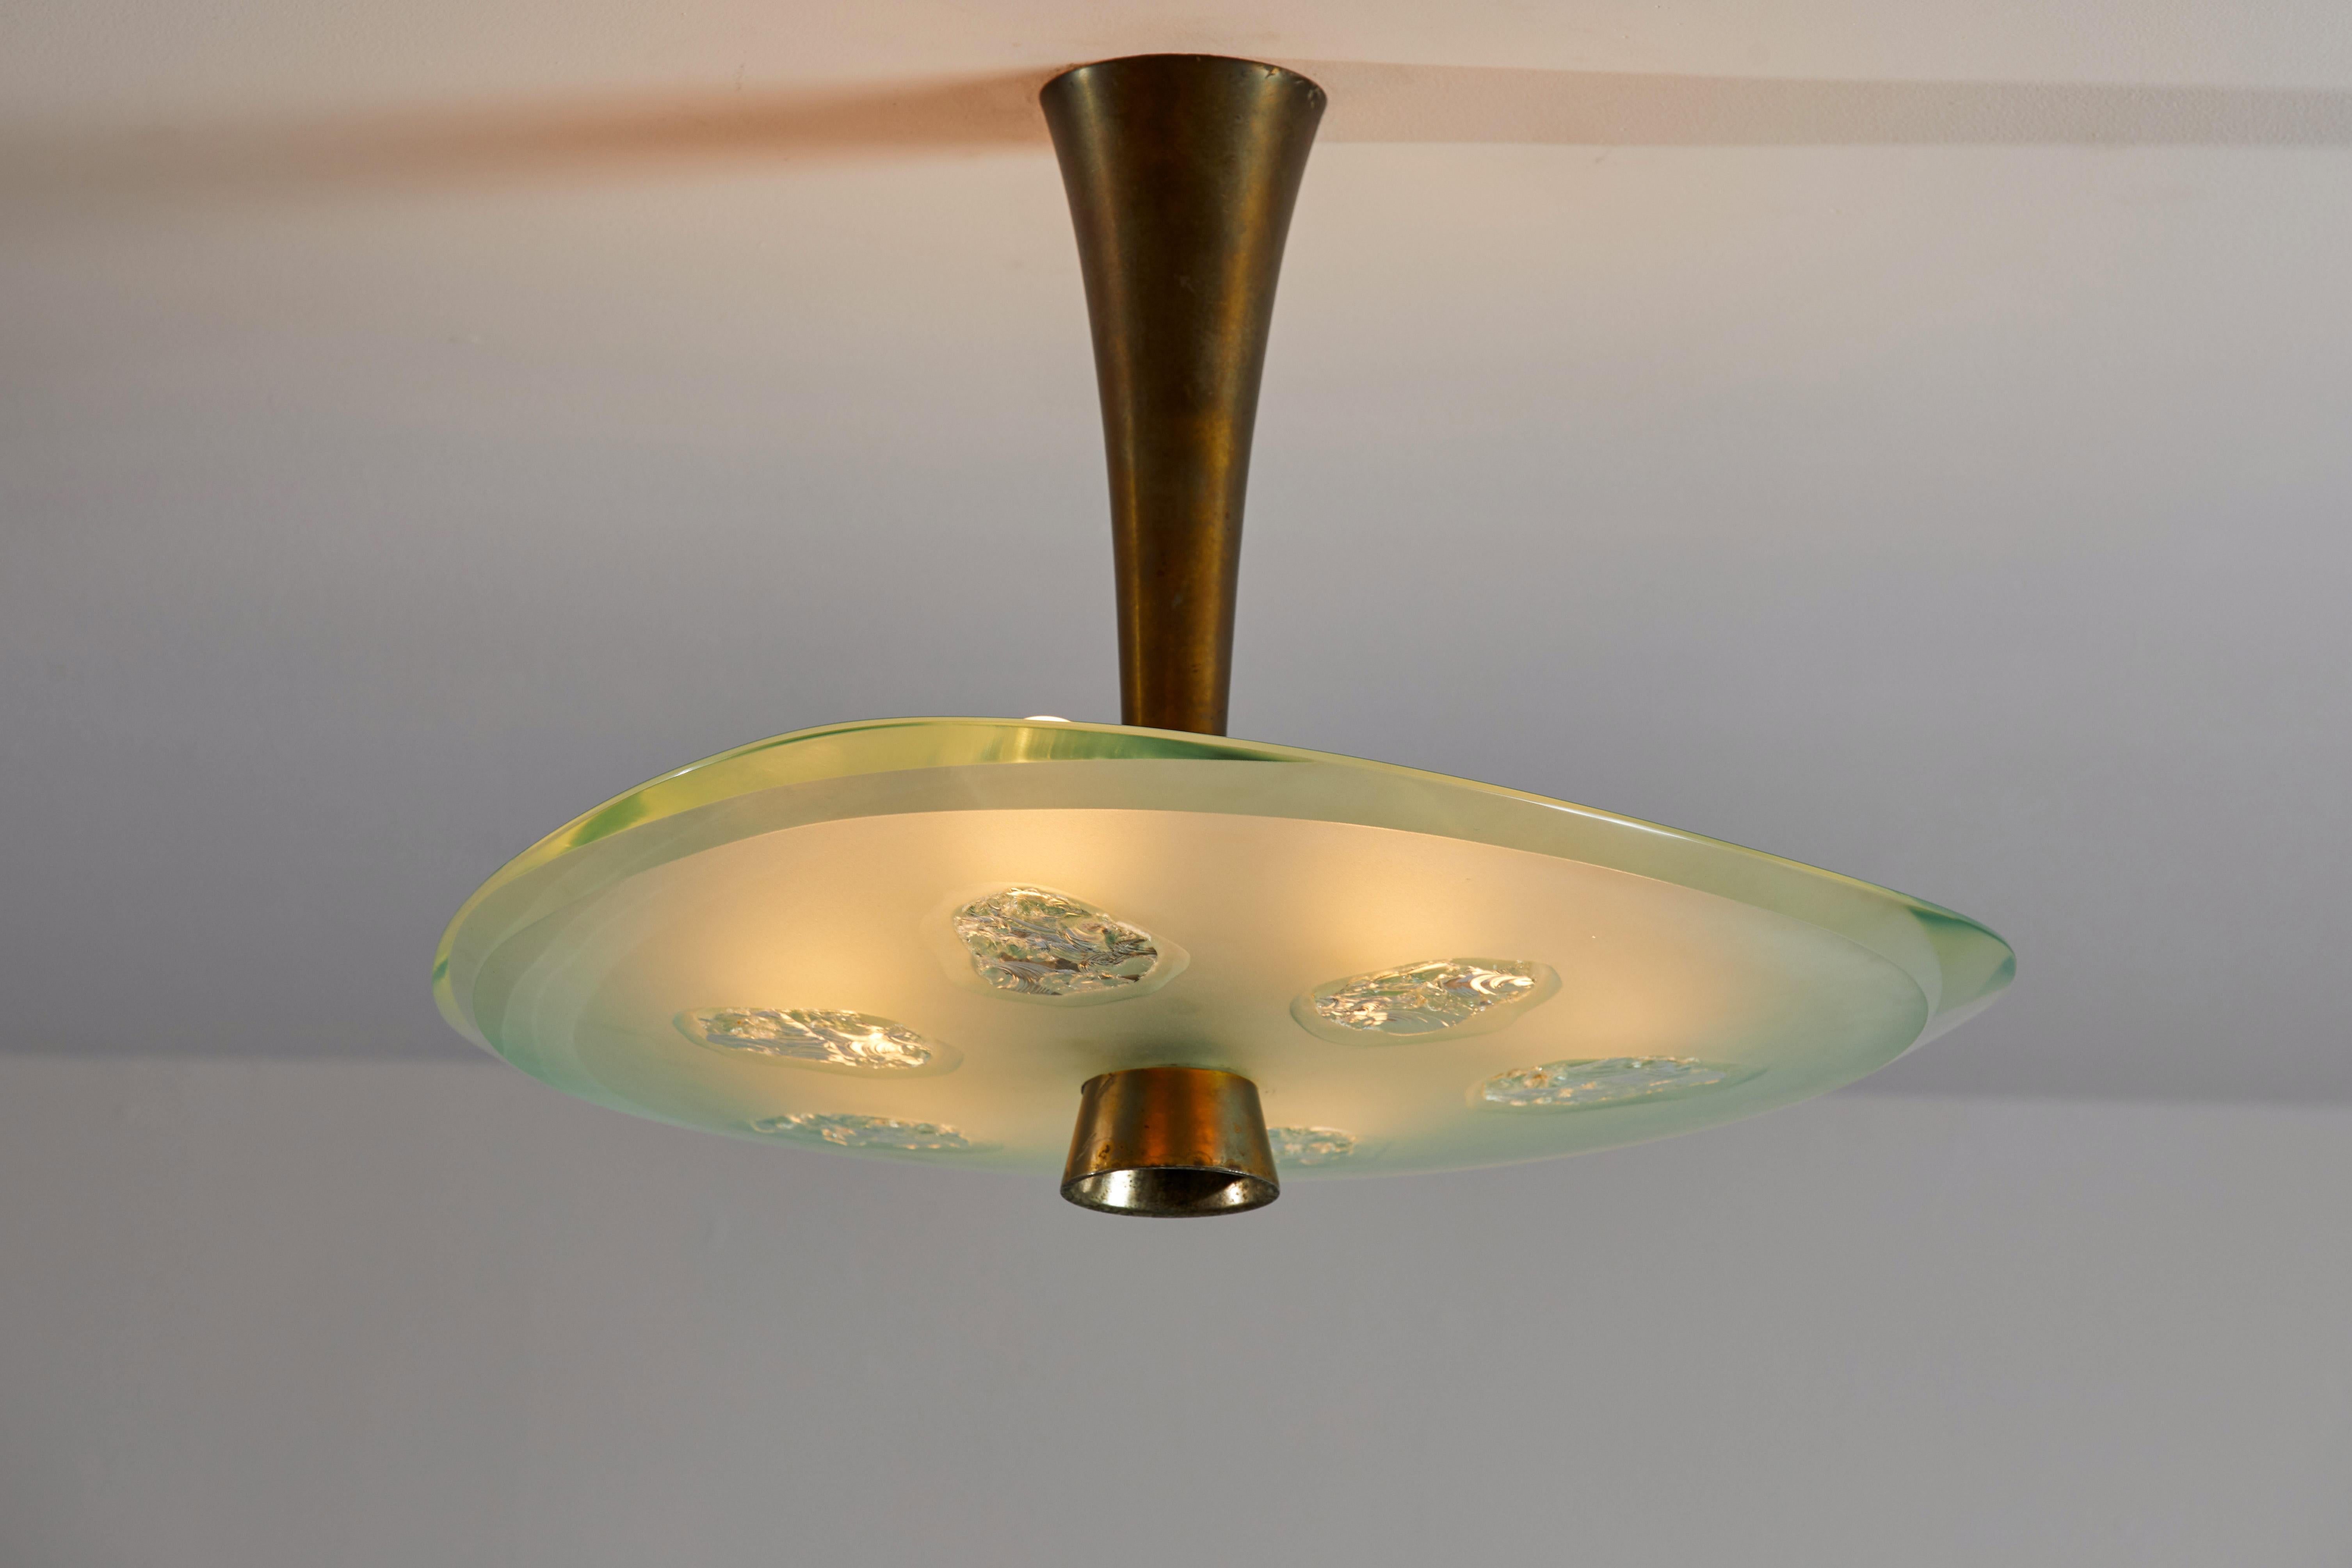 Model 1748 flush mount ceiling light by Max Ingrand for Fontana Arte. Designed and manufactured in Italy, 1959. Glass, brass. Rewired for U.S. junction boxes. Original canopy. Takes six E27 50w maximum bulbs. Bulbs provided as a onetime courtesy.